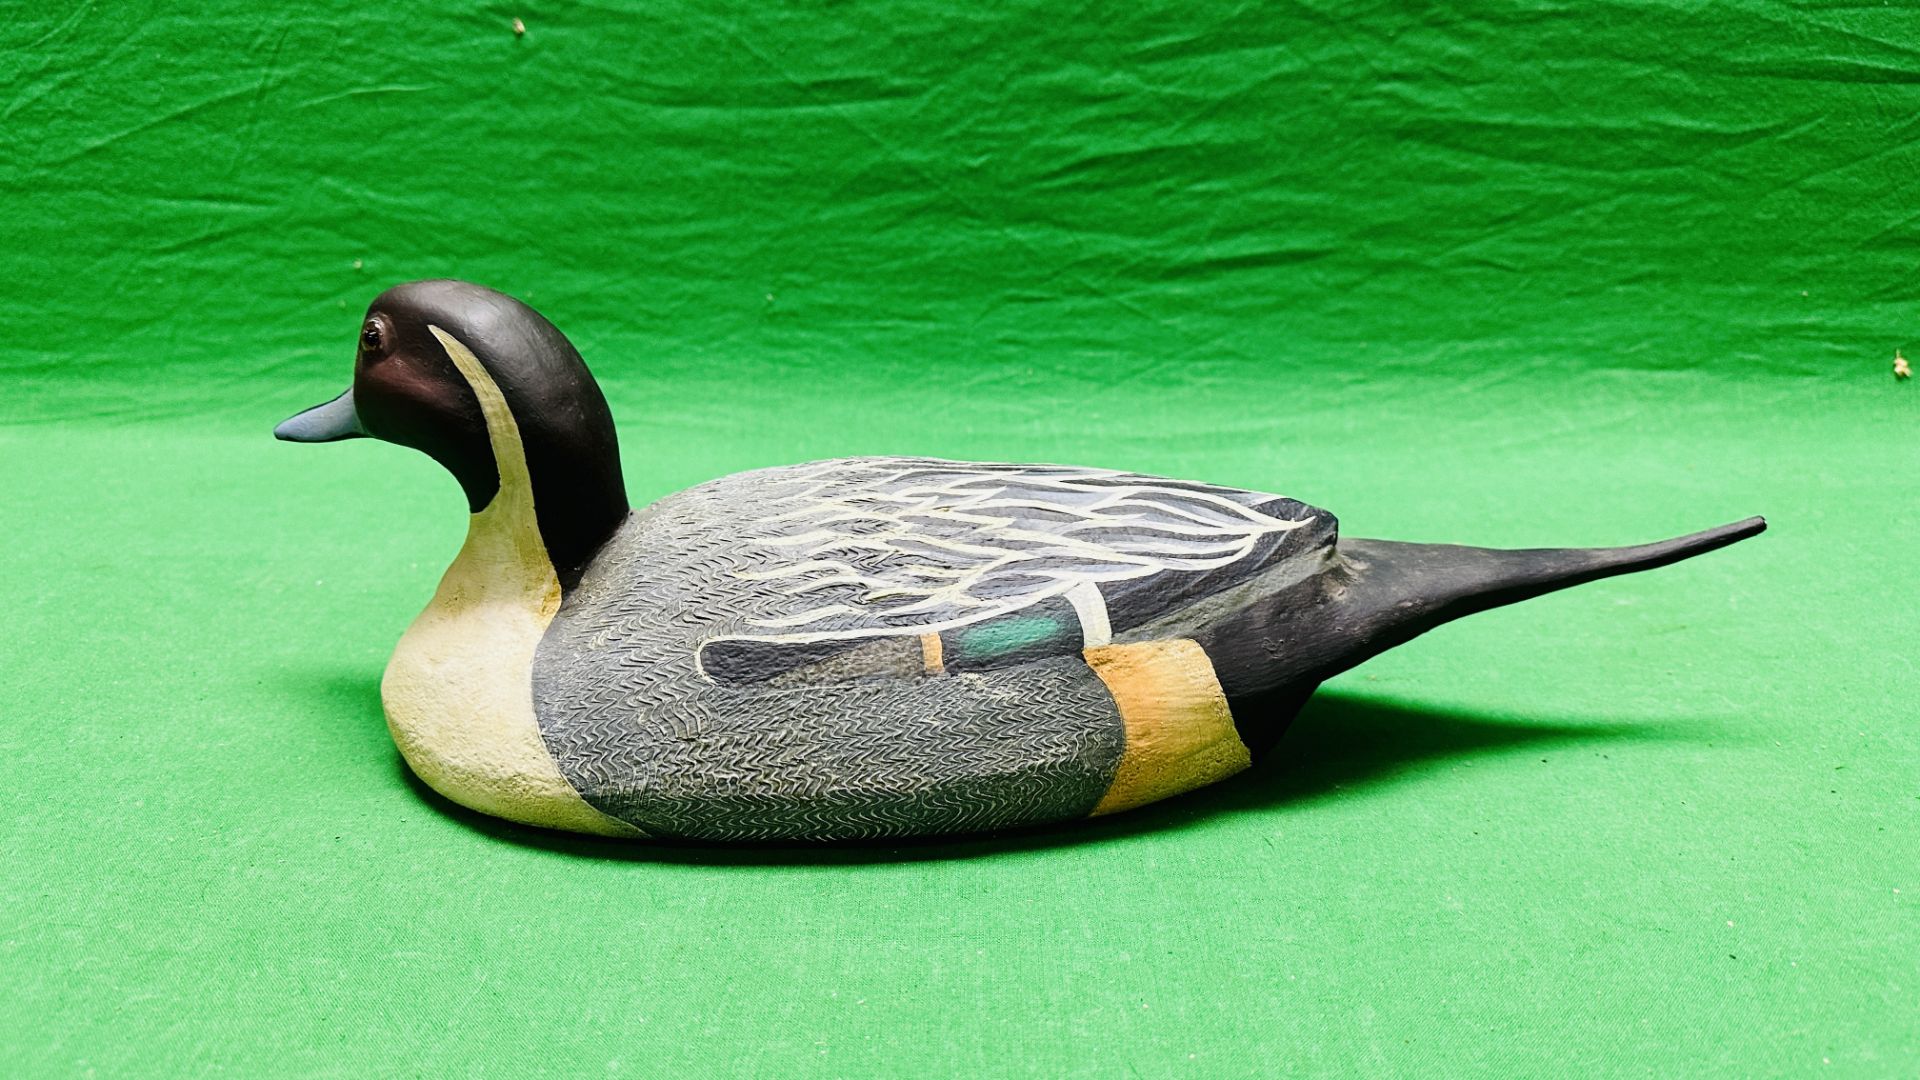 A HANDCRAFTED DUCK DECOY HAVING HANDPAINTED DETAIL AND GLASS EYES. - Image 6 of 10